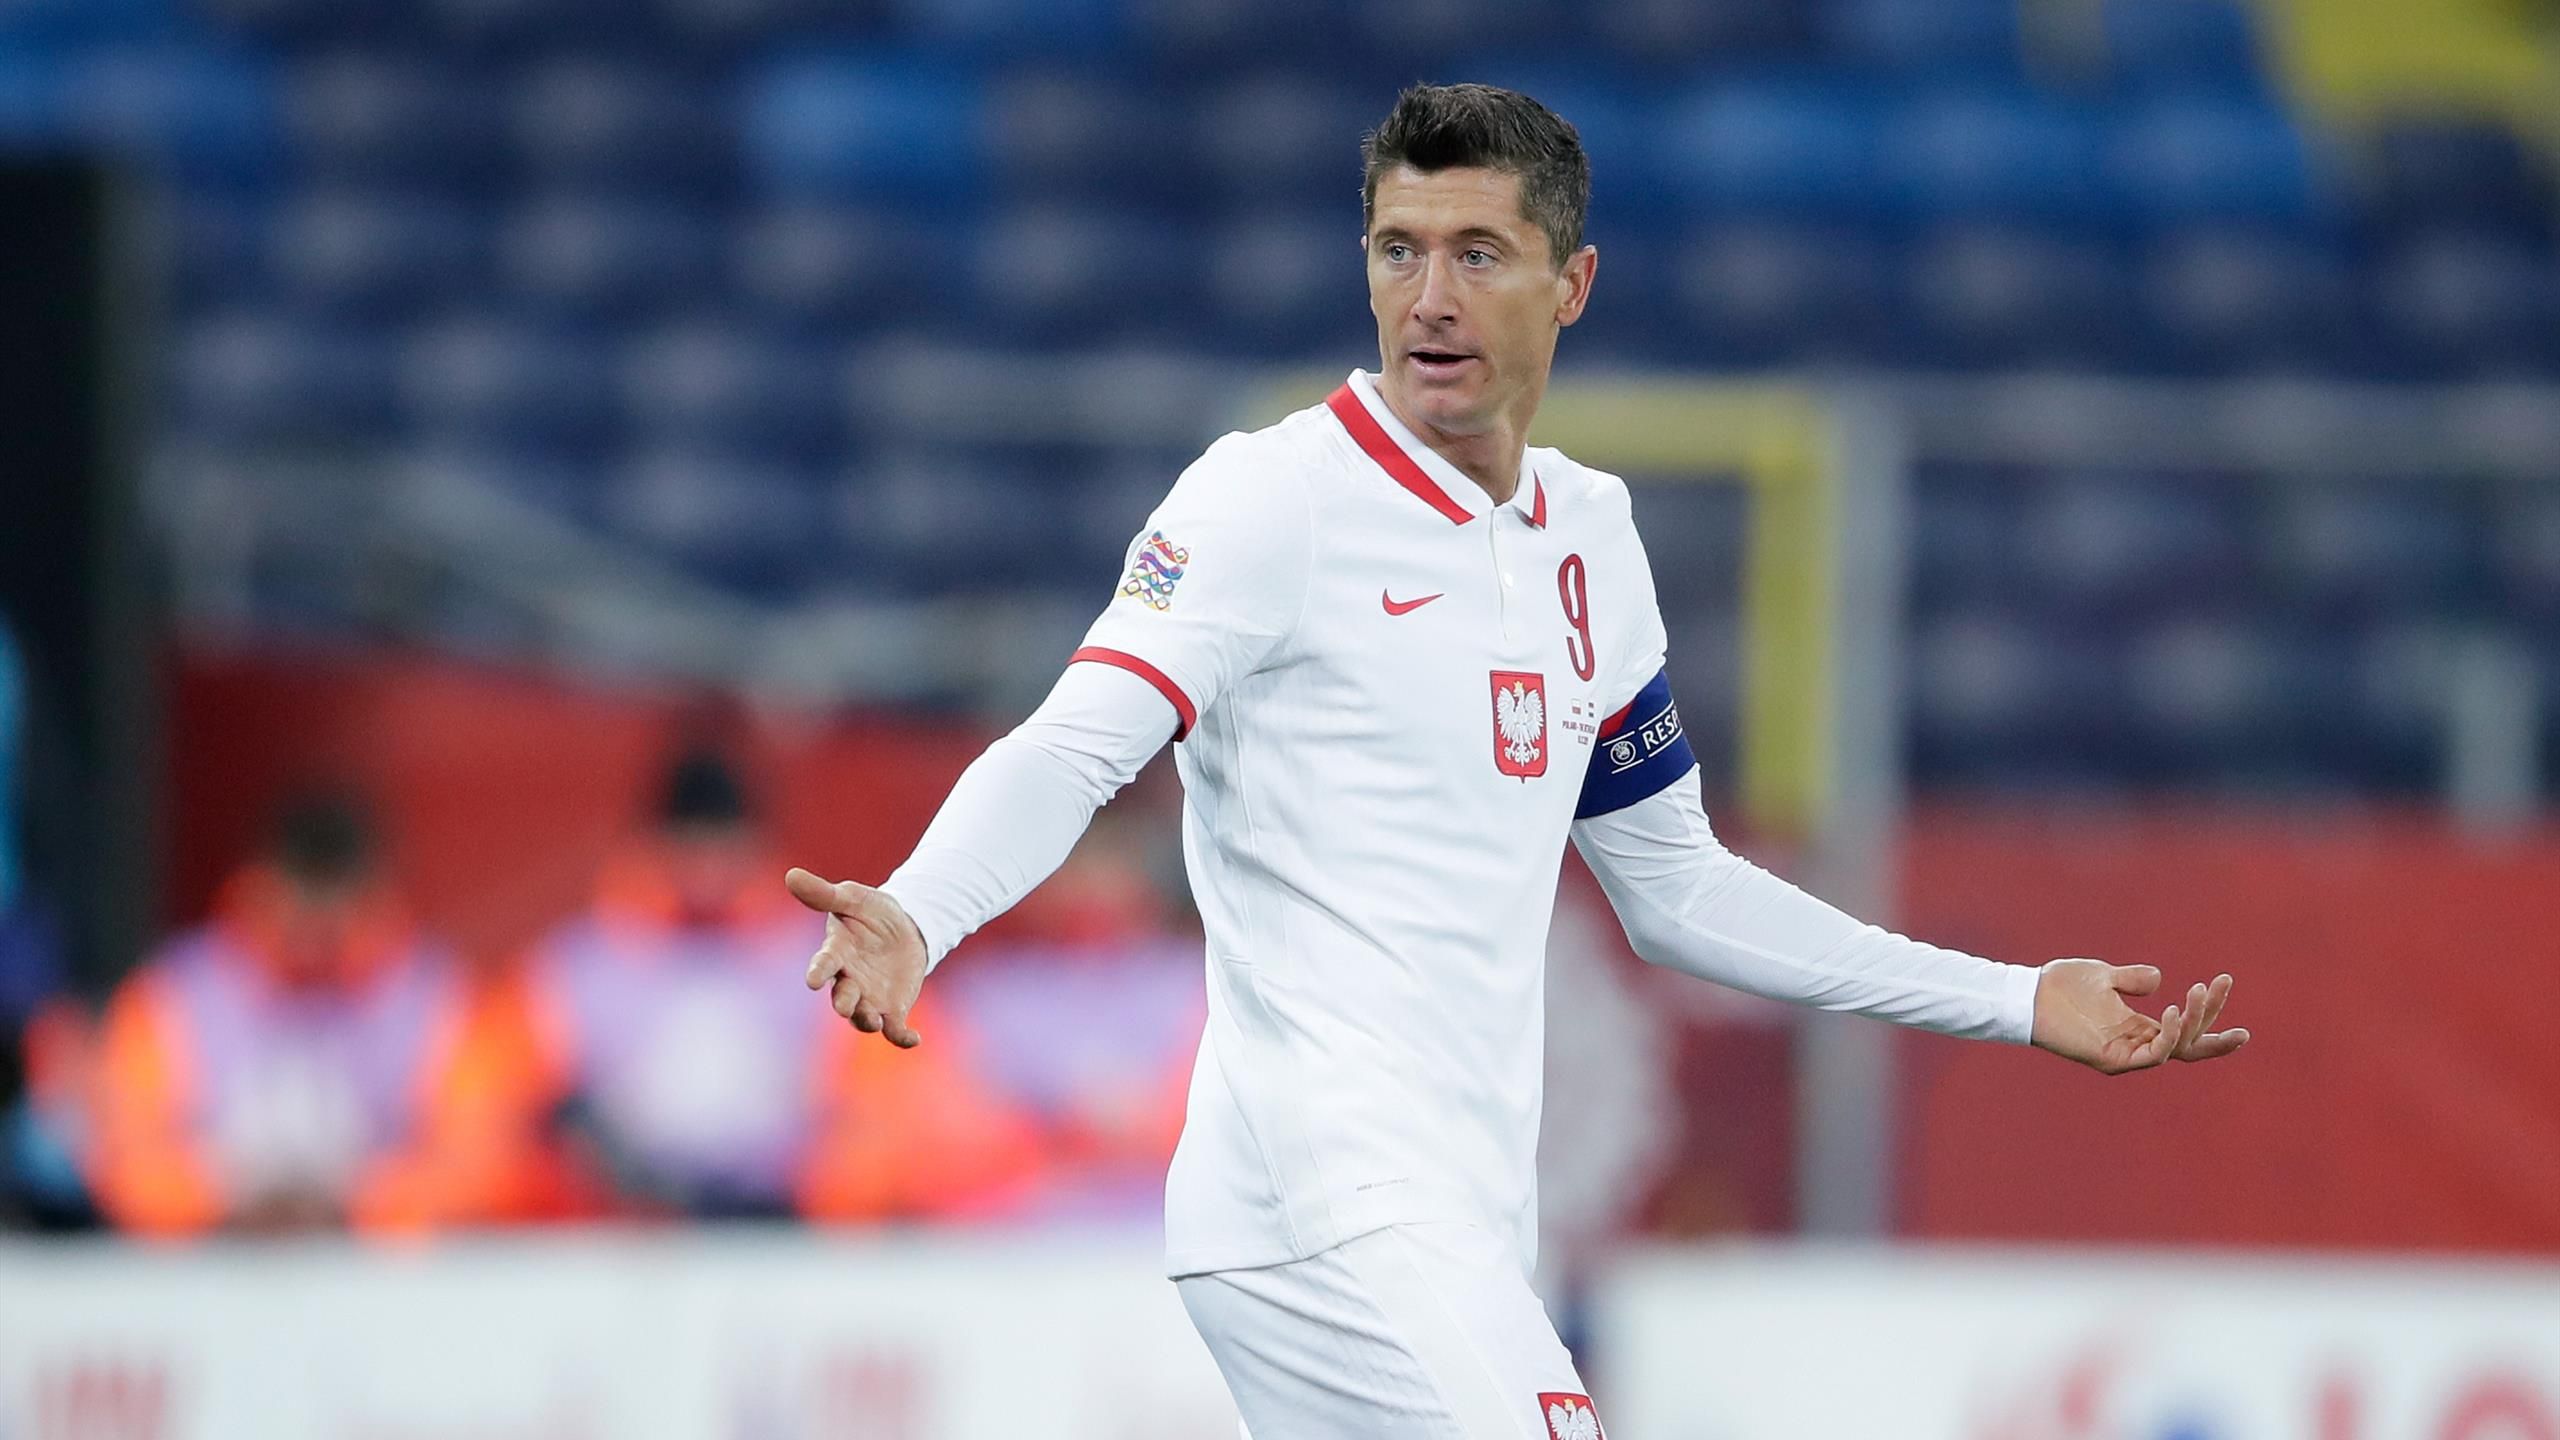 World Cup 2022 Qualifiers's Robert Lewandowski unlikely to face England at Wembley